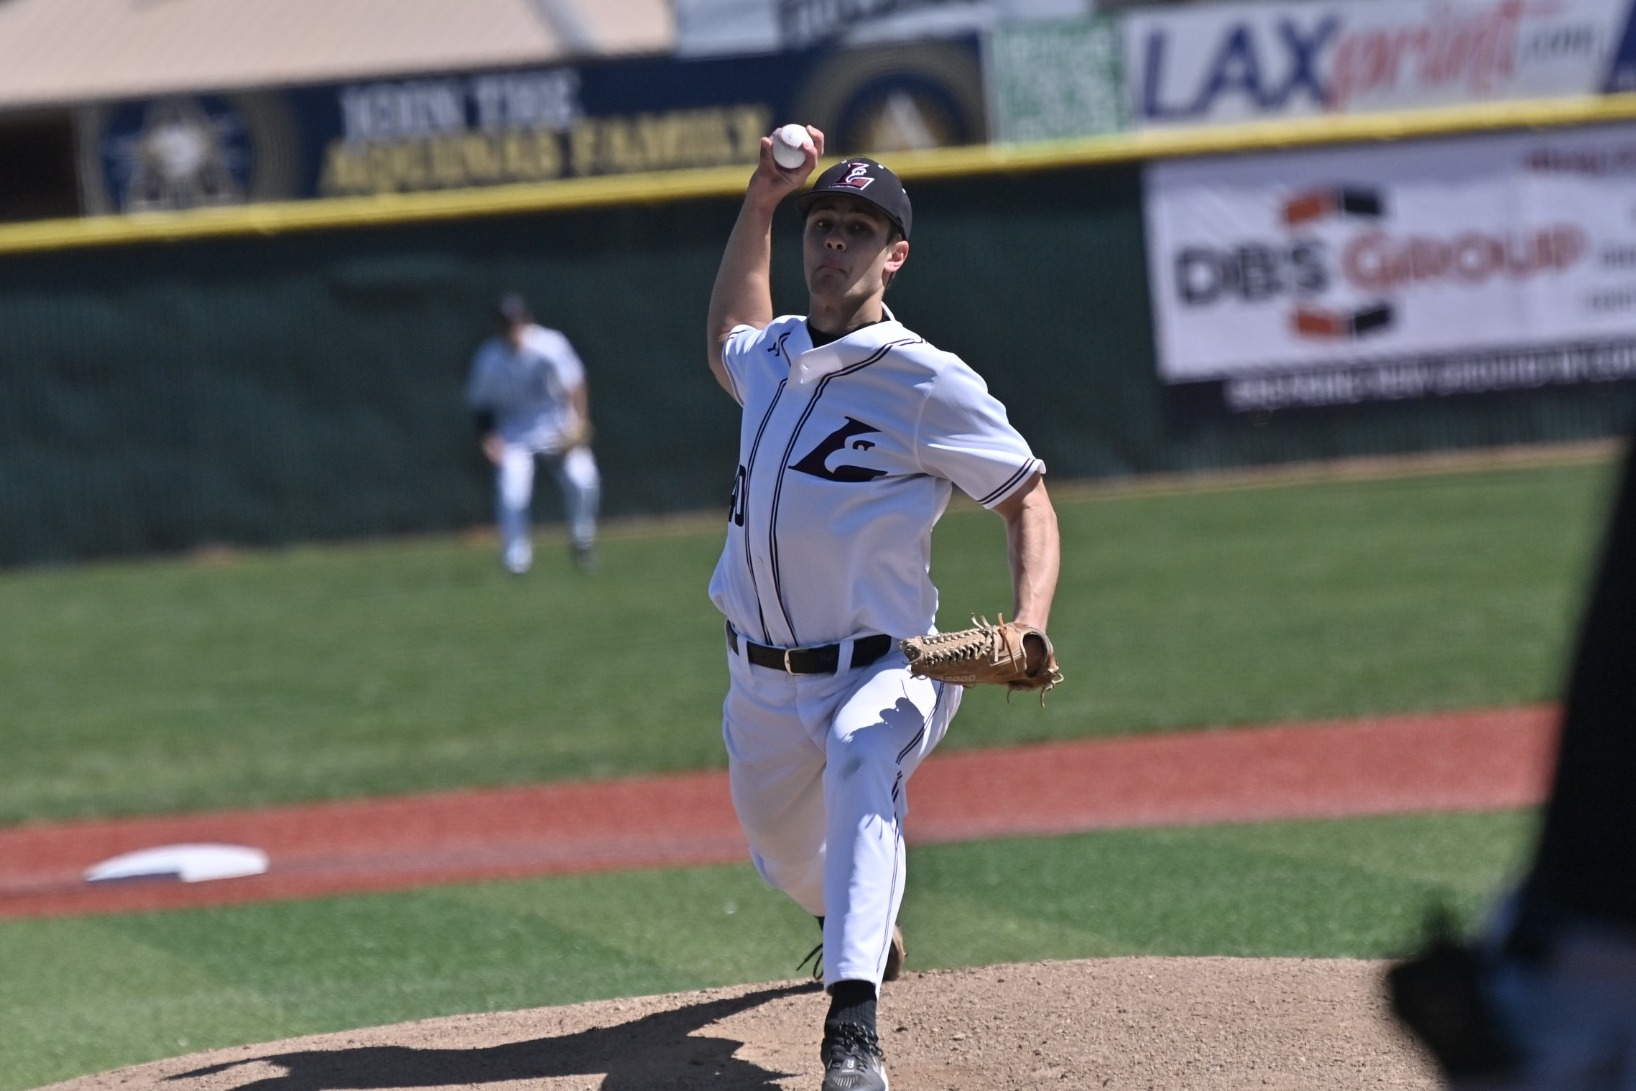 No. 16 UW-L baseball faces 5th-ranked UW-Whitewater in bid to get back to College World Series